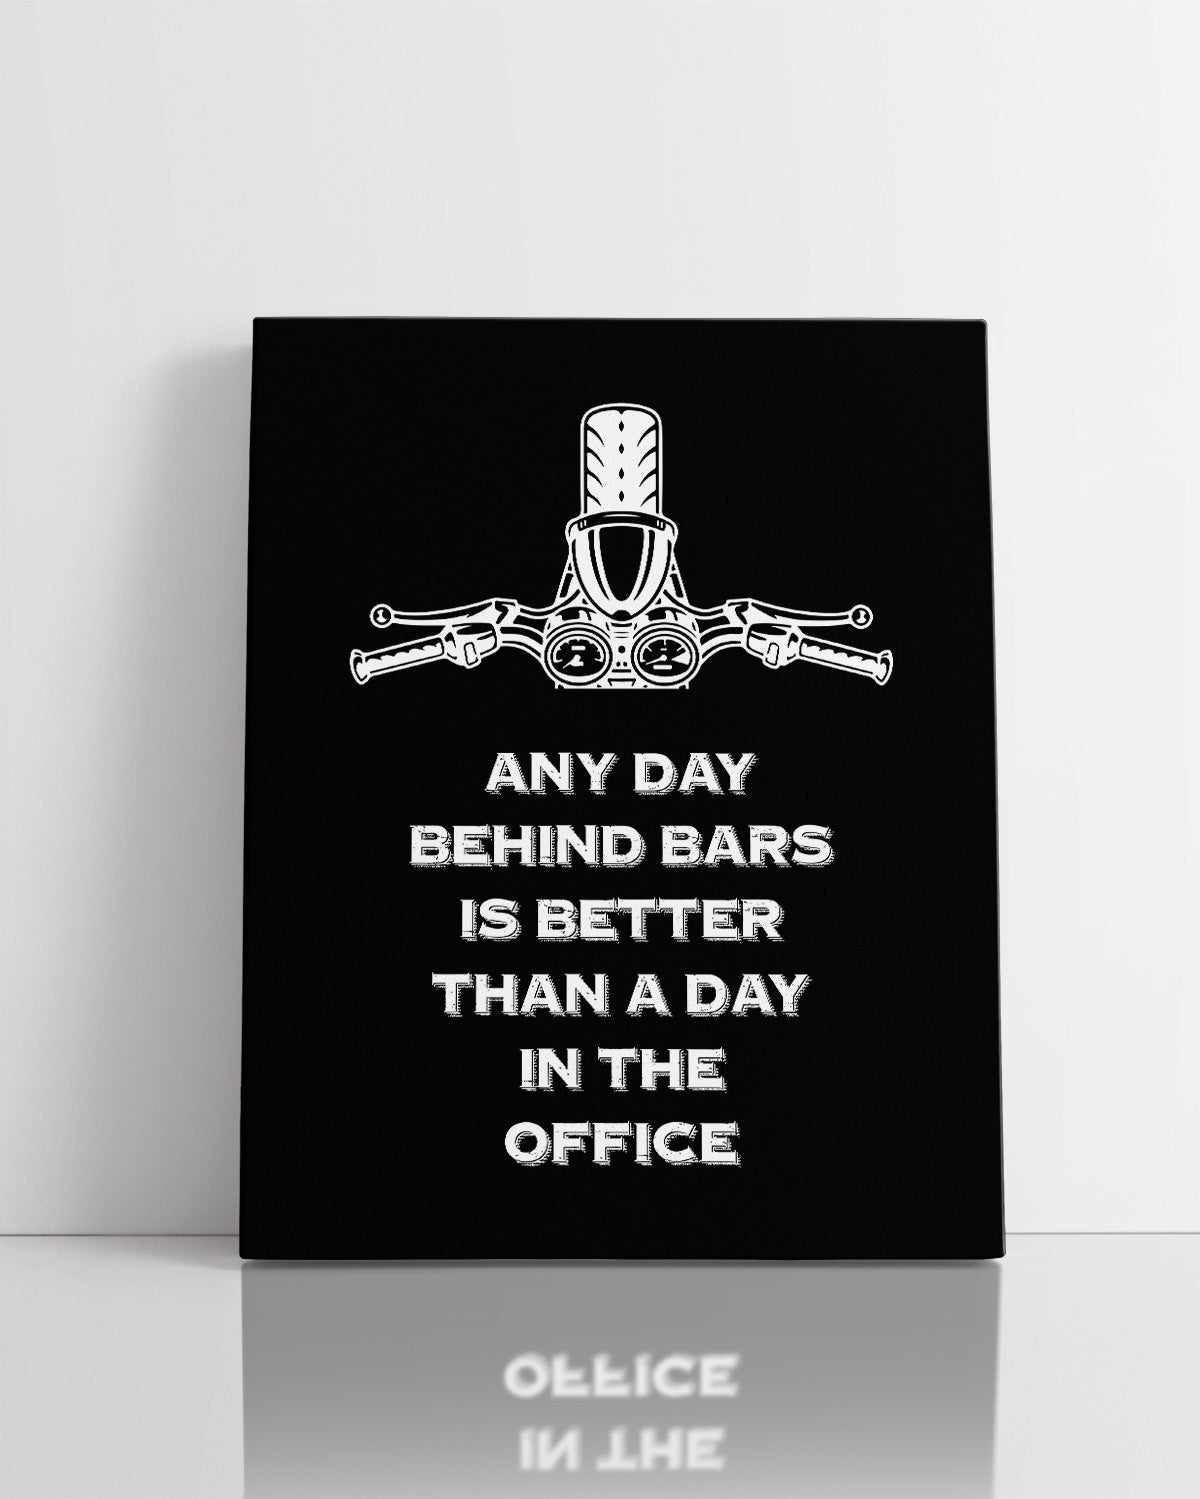 Any Day Behind Bars Is Better Than A Day In The Office - Motorcycle Wall Decor Art Print On A Black Background